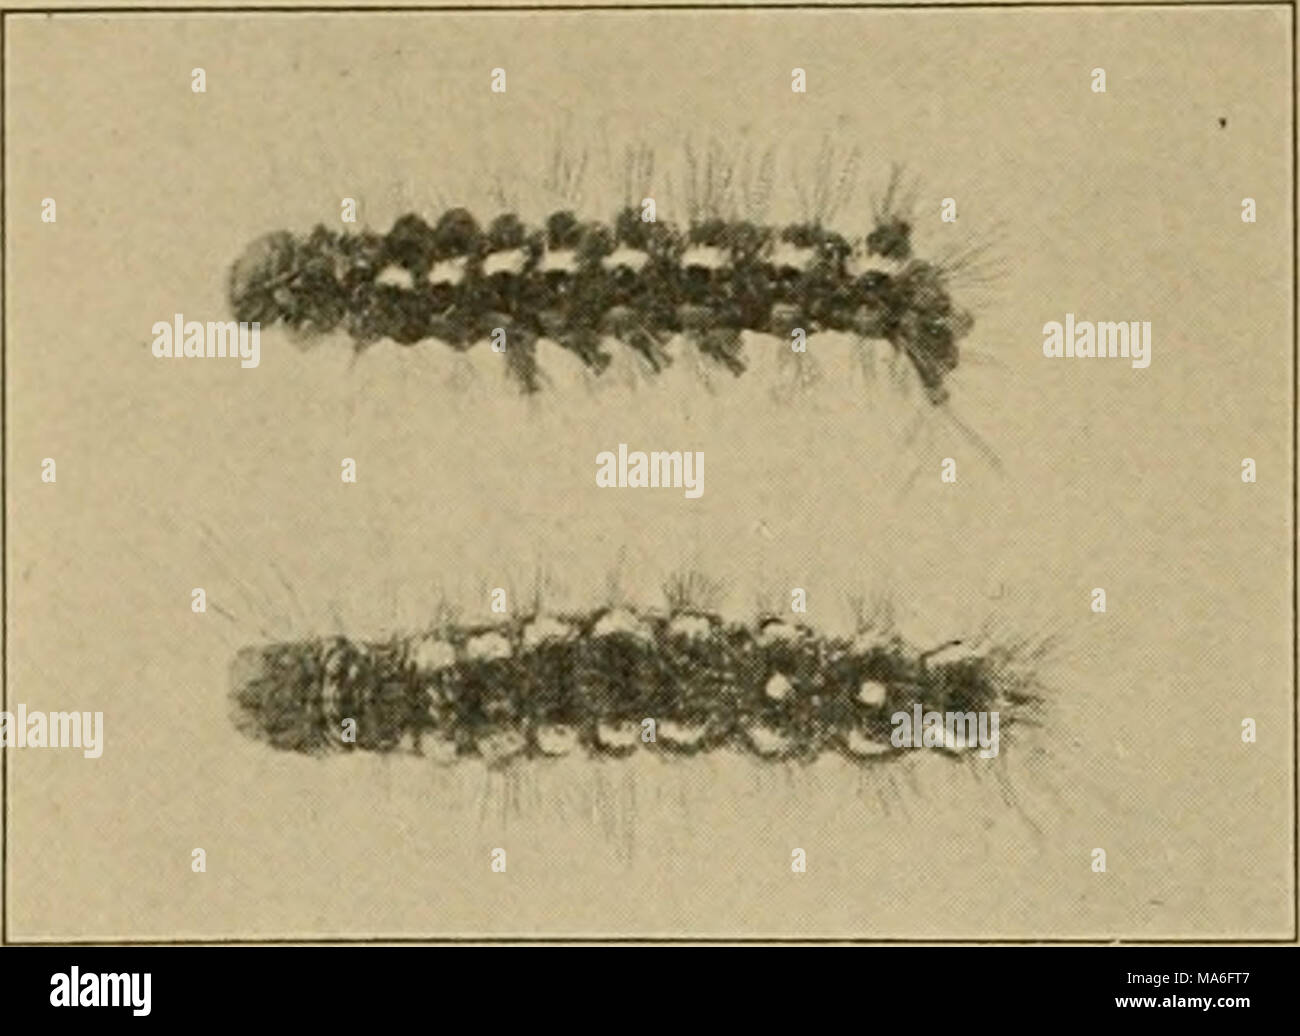 Elementary Entomology Fig 324 The Brown Tail Moth Caterpillar From Side And Back Natural Size Branches With Strands Of Silk And In Them Spin Httle Silken Cells The Whole Forming A Strong